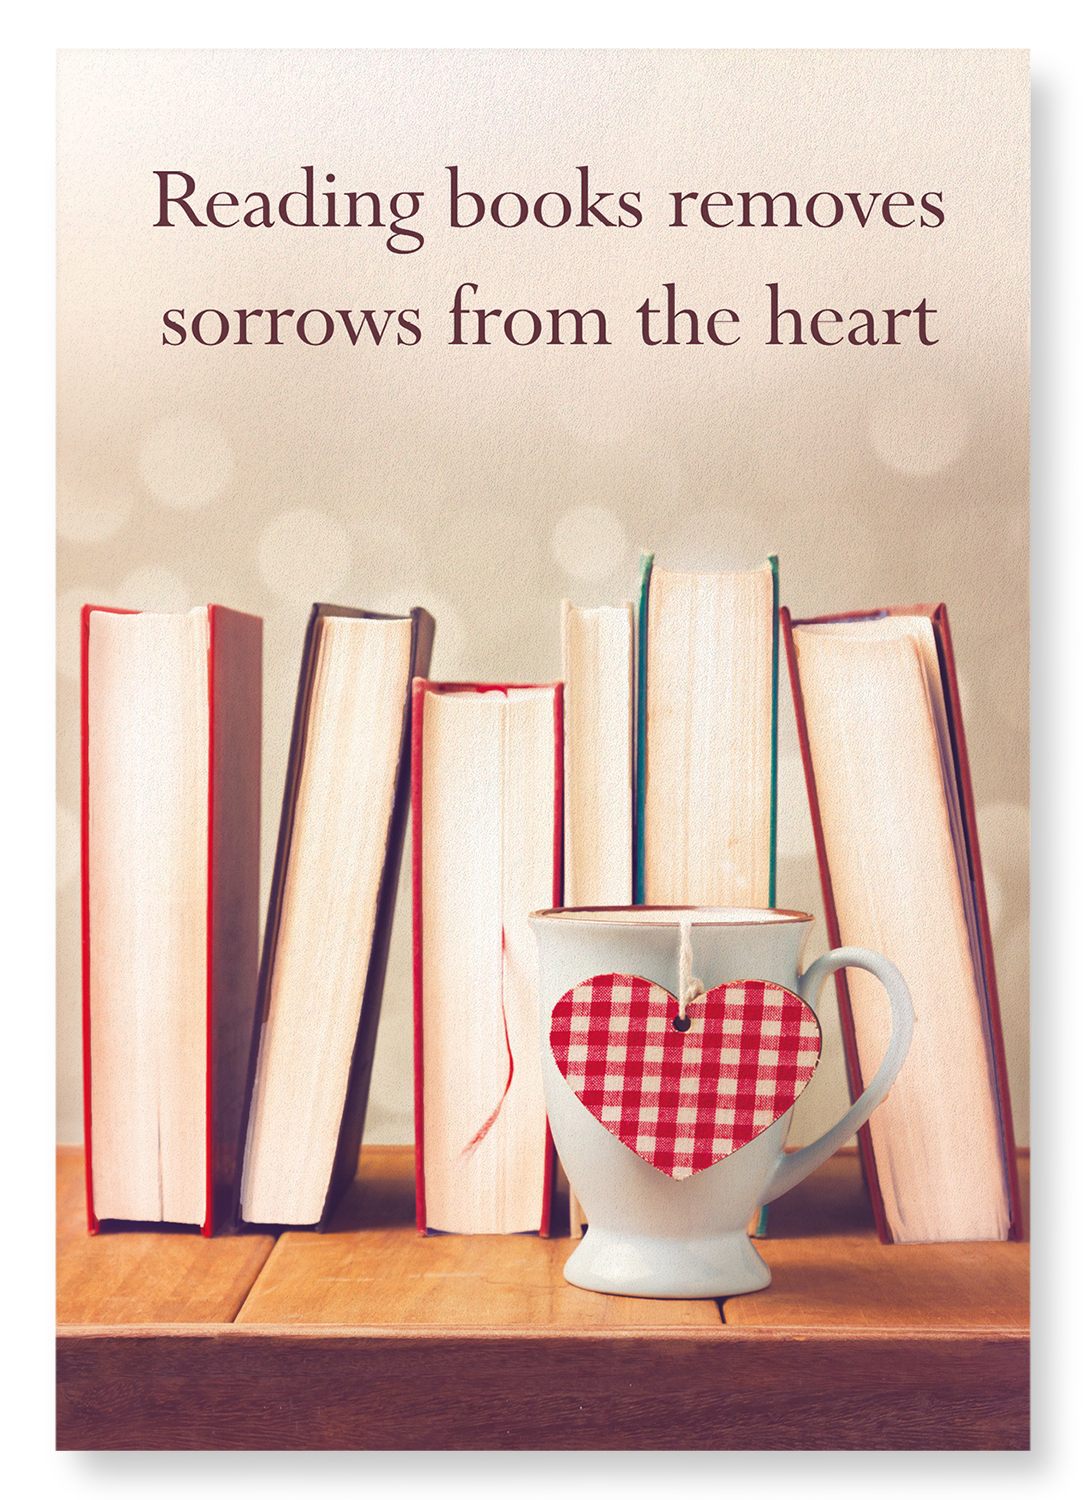 READING FOR THE HEART: Photo Art print